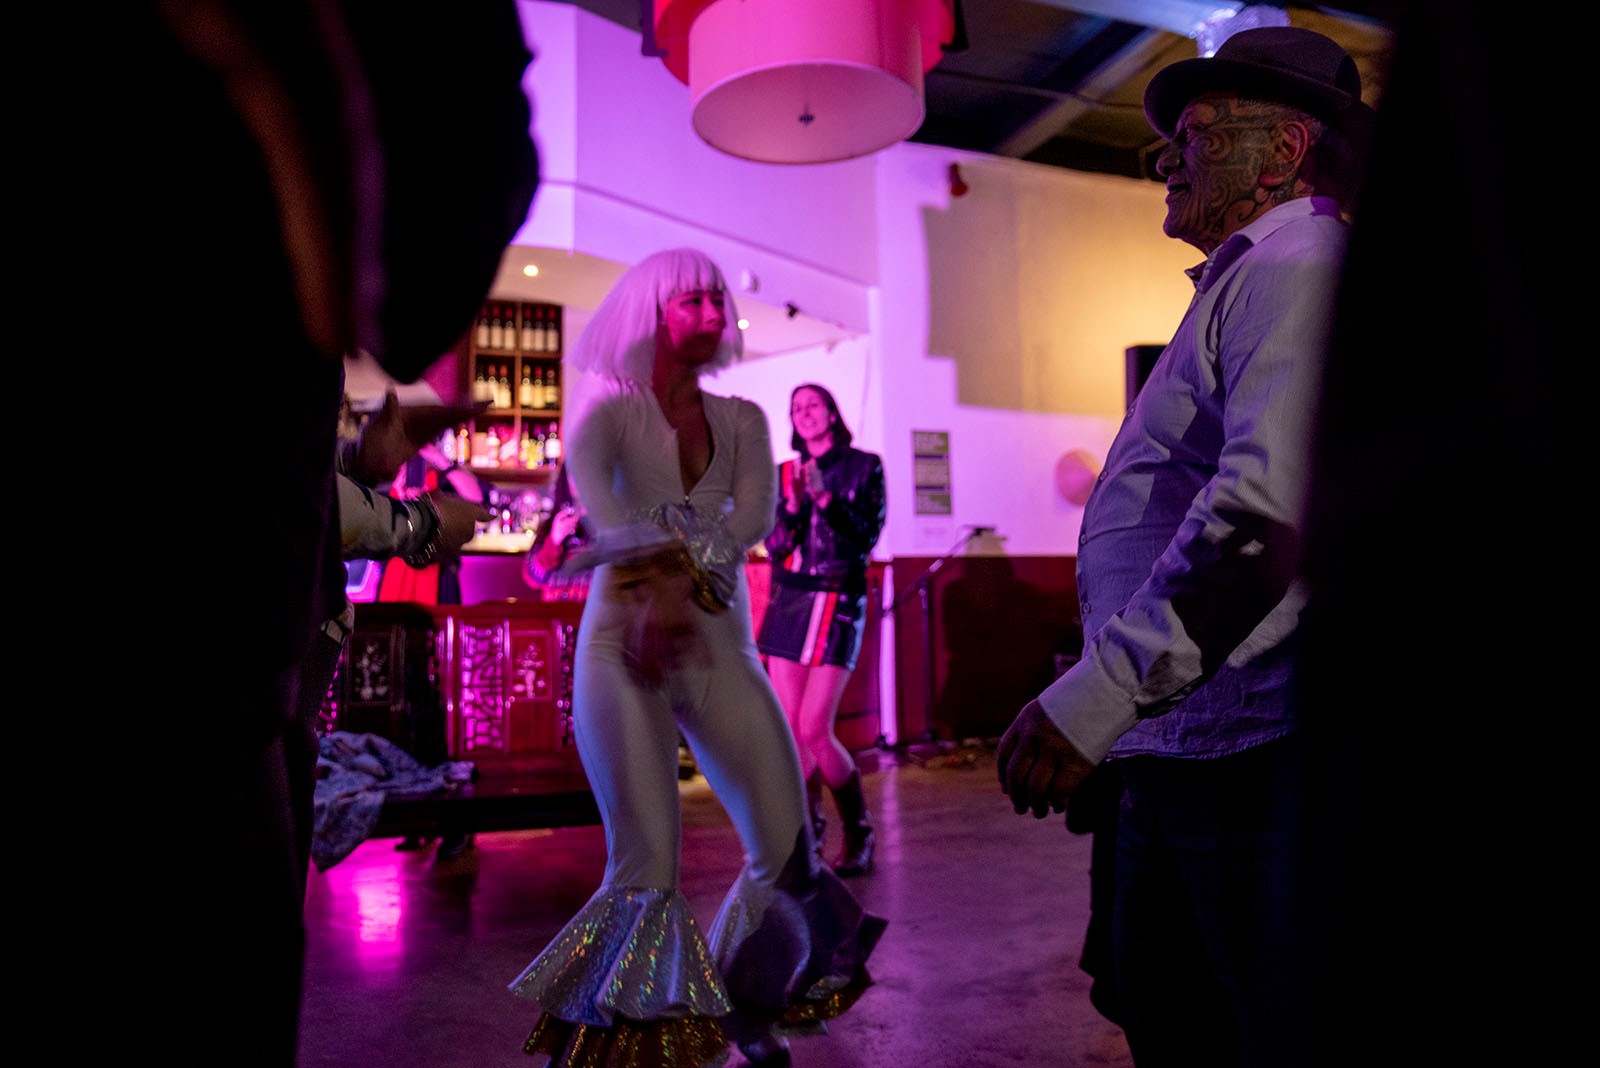 Emiko Sheehan dances in a white spandex suit with a white wig, with Tame Iti, inside a pink-lit restaurant